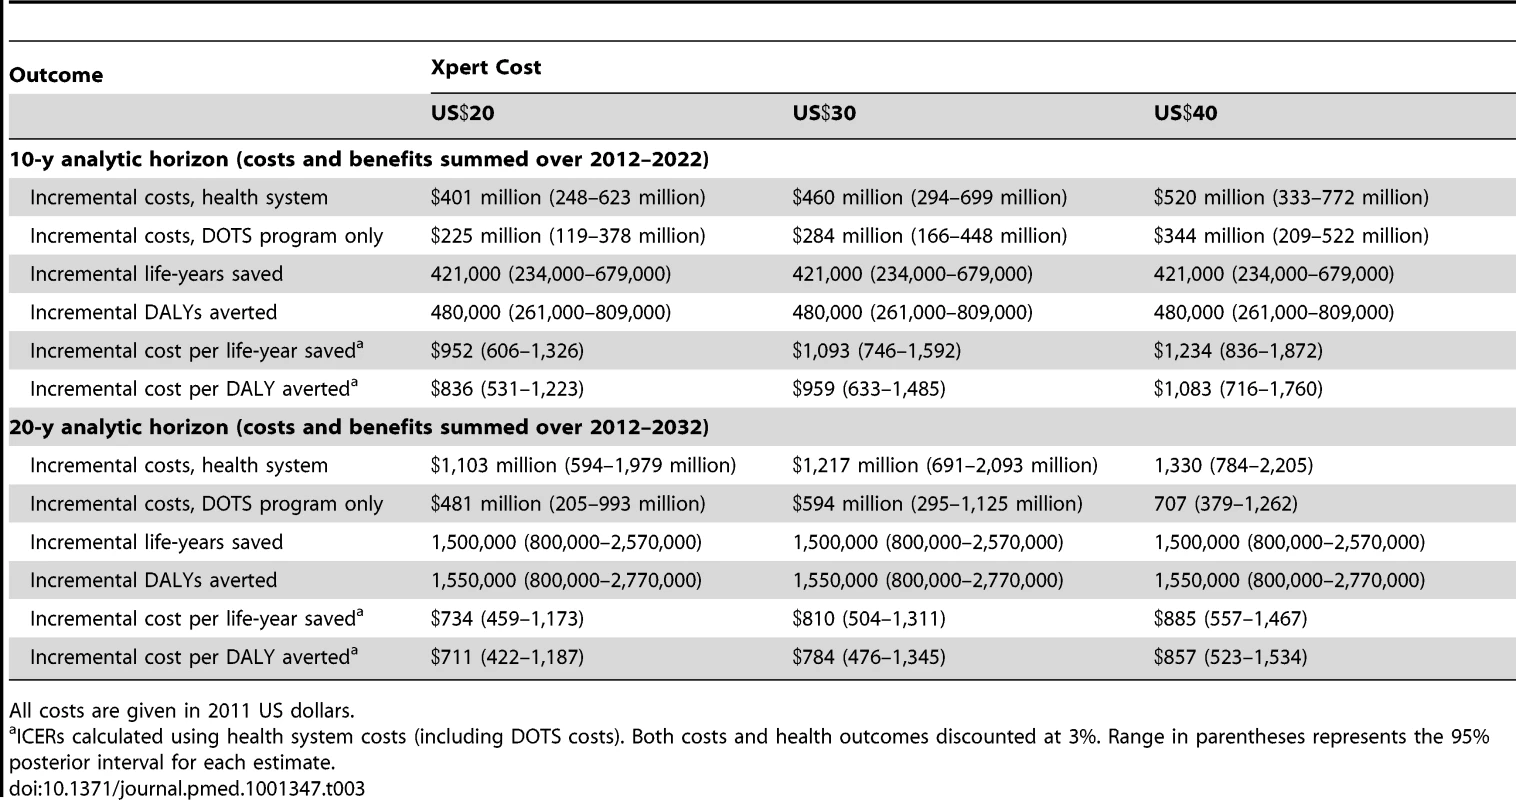 Cost-effectiveness results for Xpert algorithm compared to status quo algorithm in southern Africa.